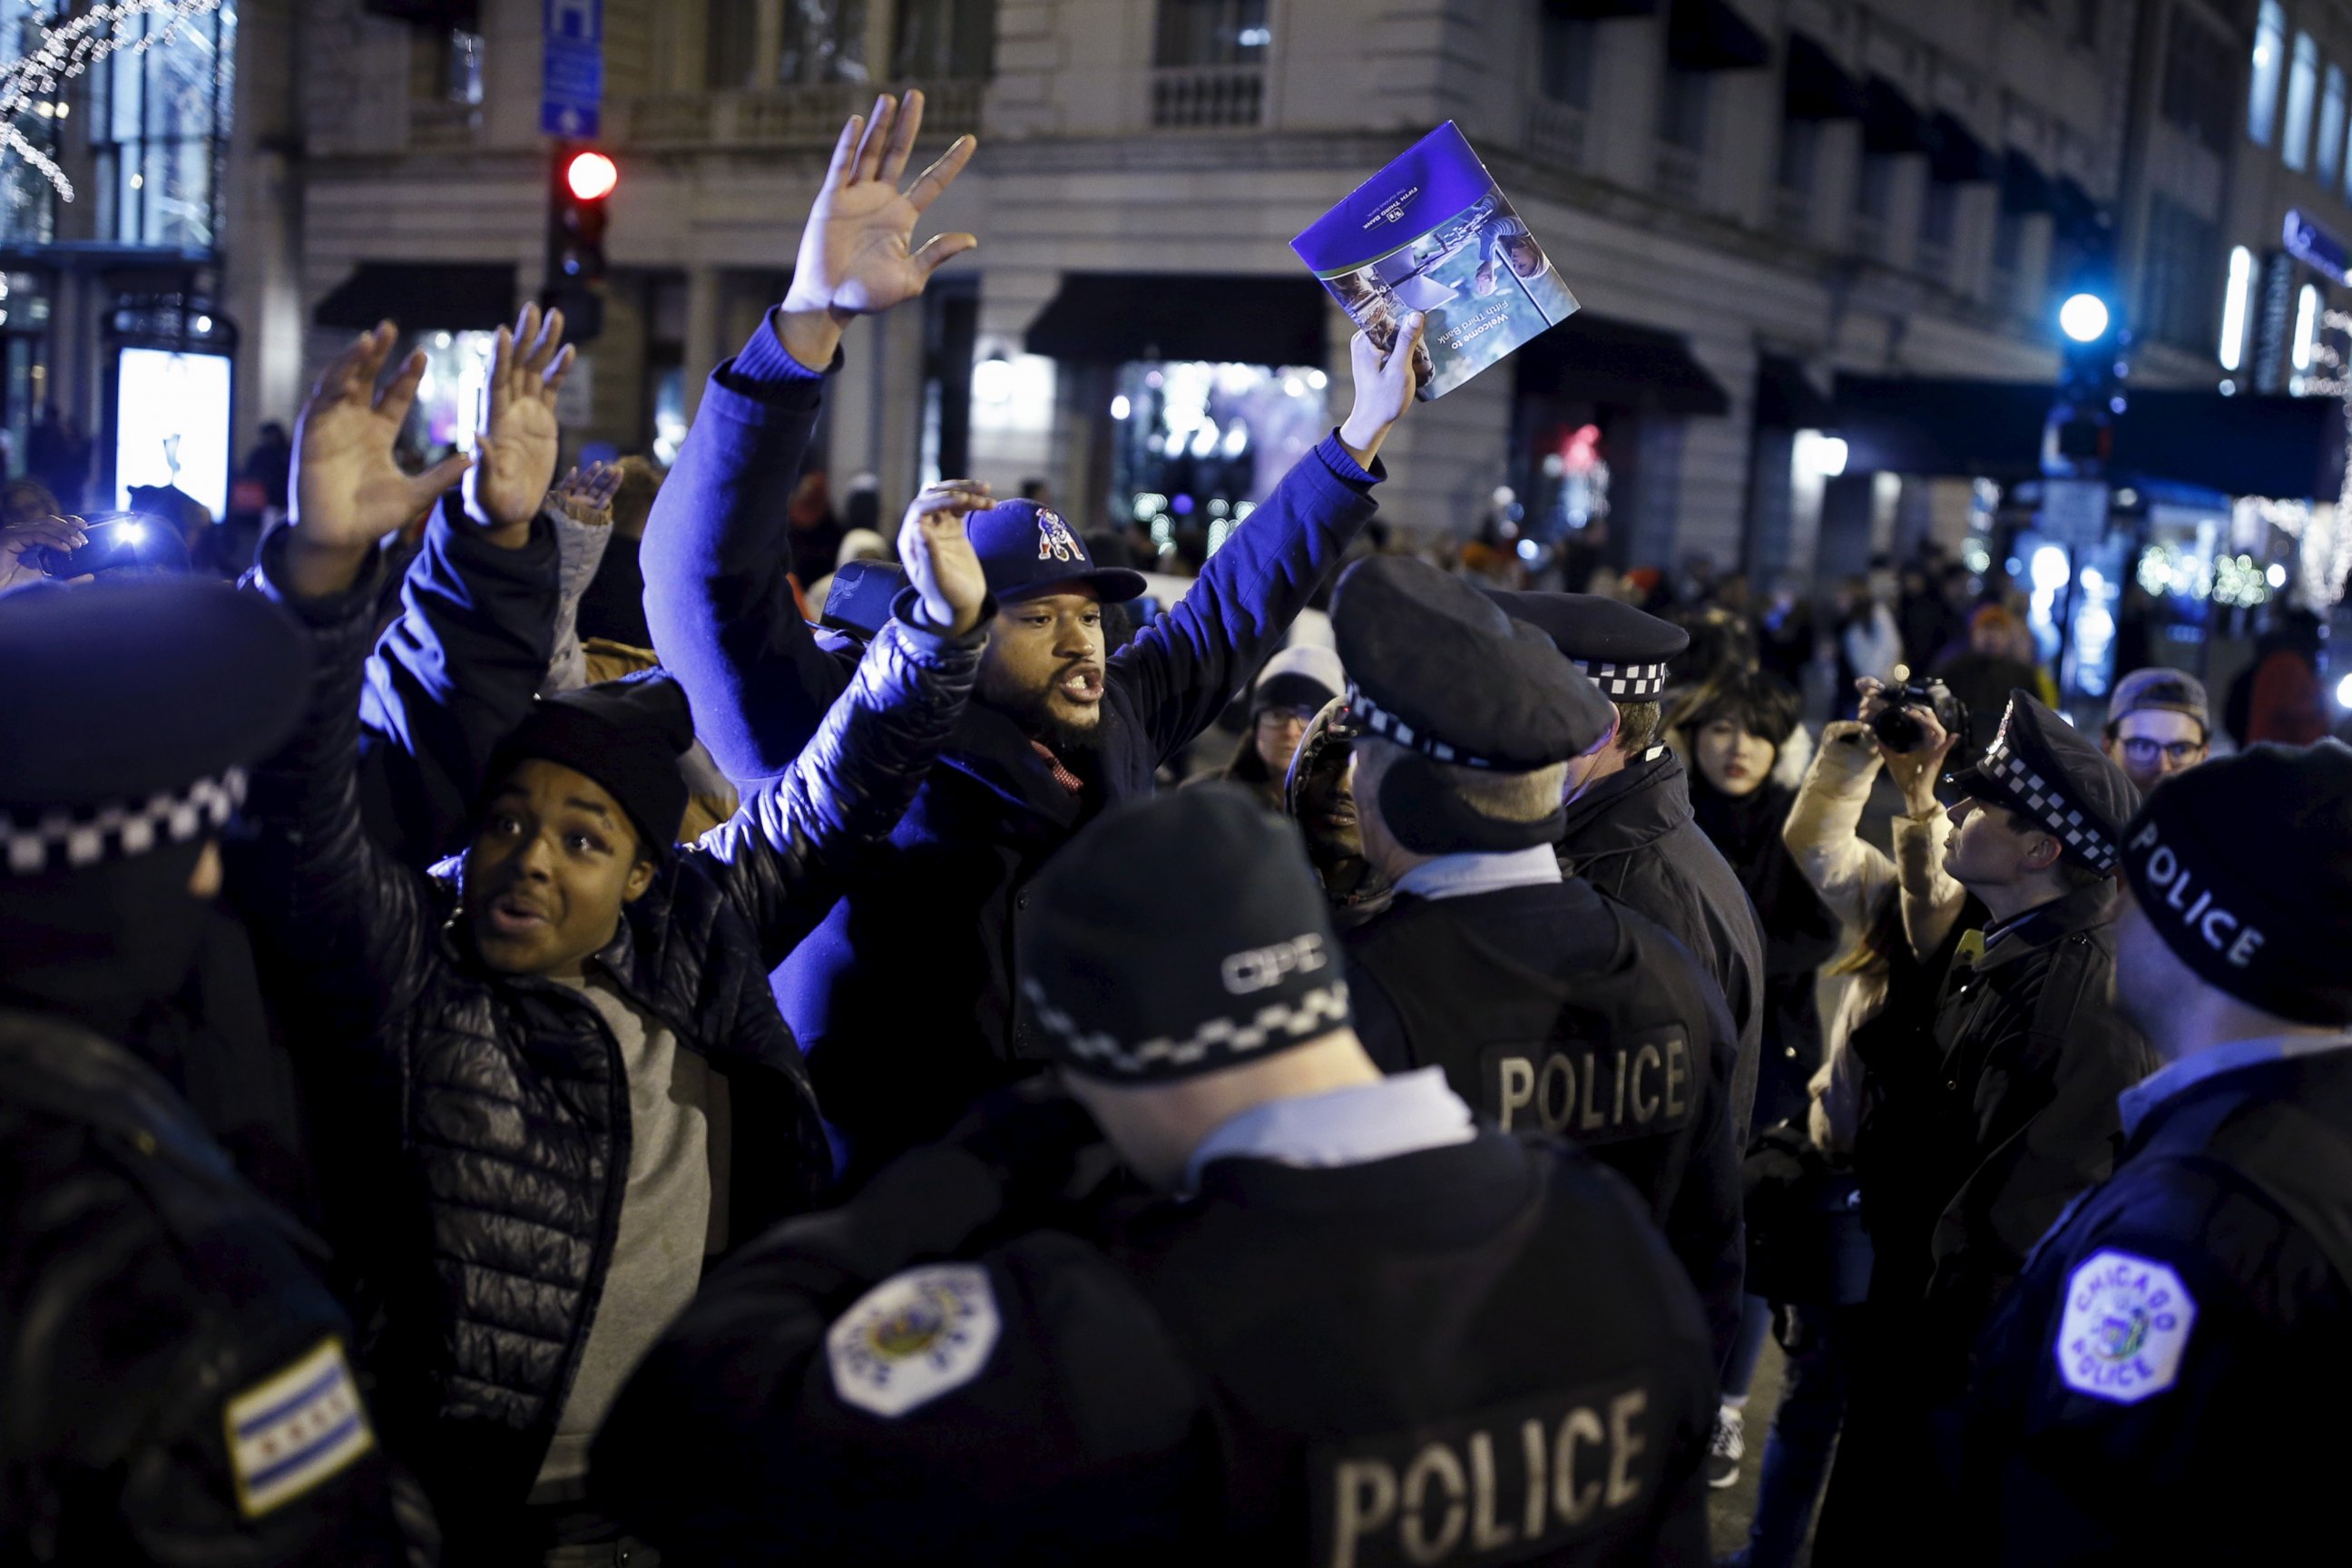 PHOTO: Demonstrators confront police officers during a protest in reaction to the fatal shooting of Laquan McDonald in Chicago, Nov. 27, 2015. Laquan McDonald, 17, was fatally shot by Jason Van Dyke, a Chicago police officer, in October 2014. 